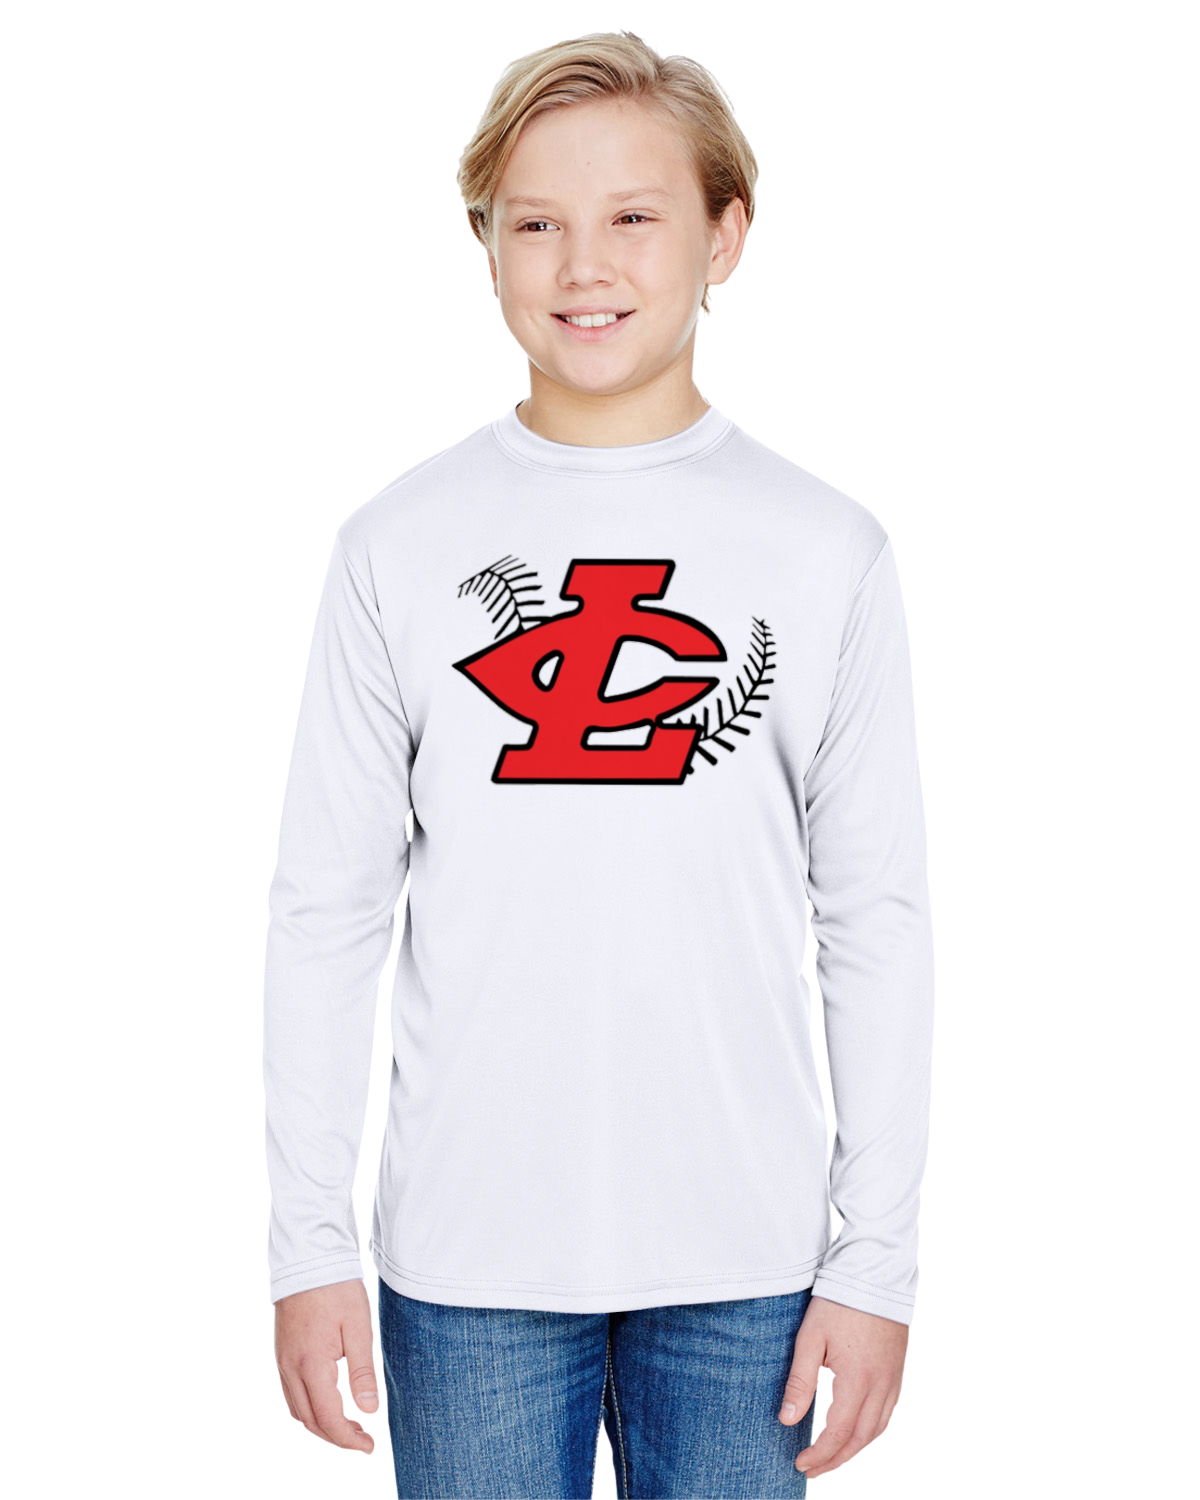 CLLL A4 Youth Cooling Performance Long Sleeve T-Shirt